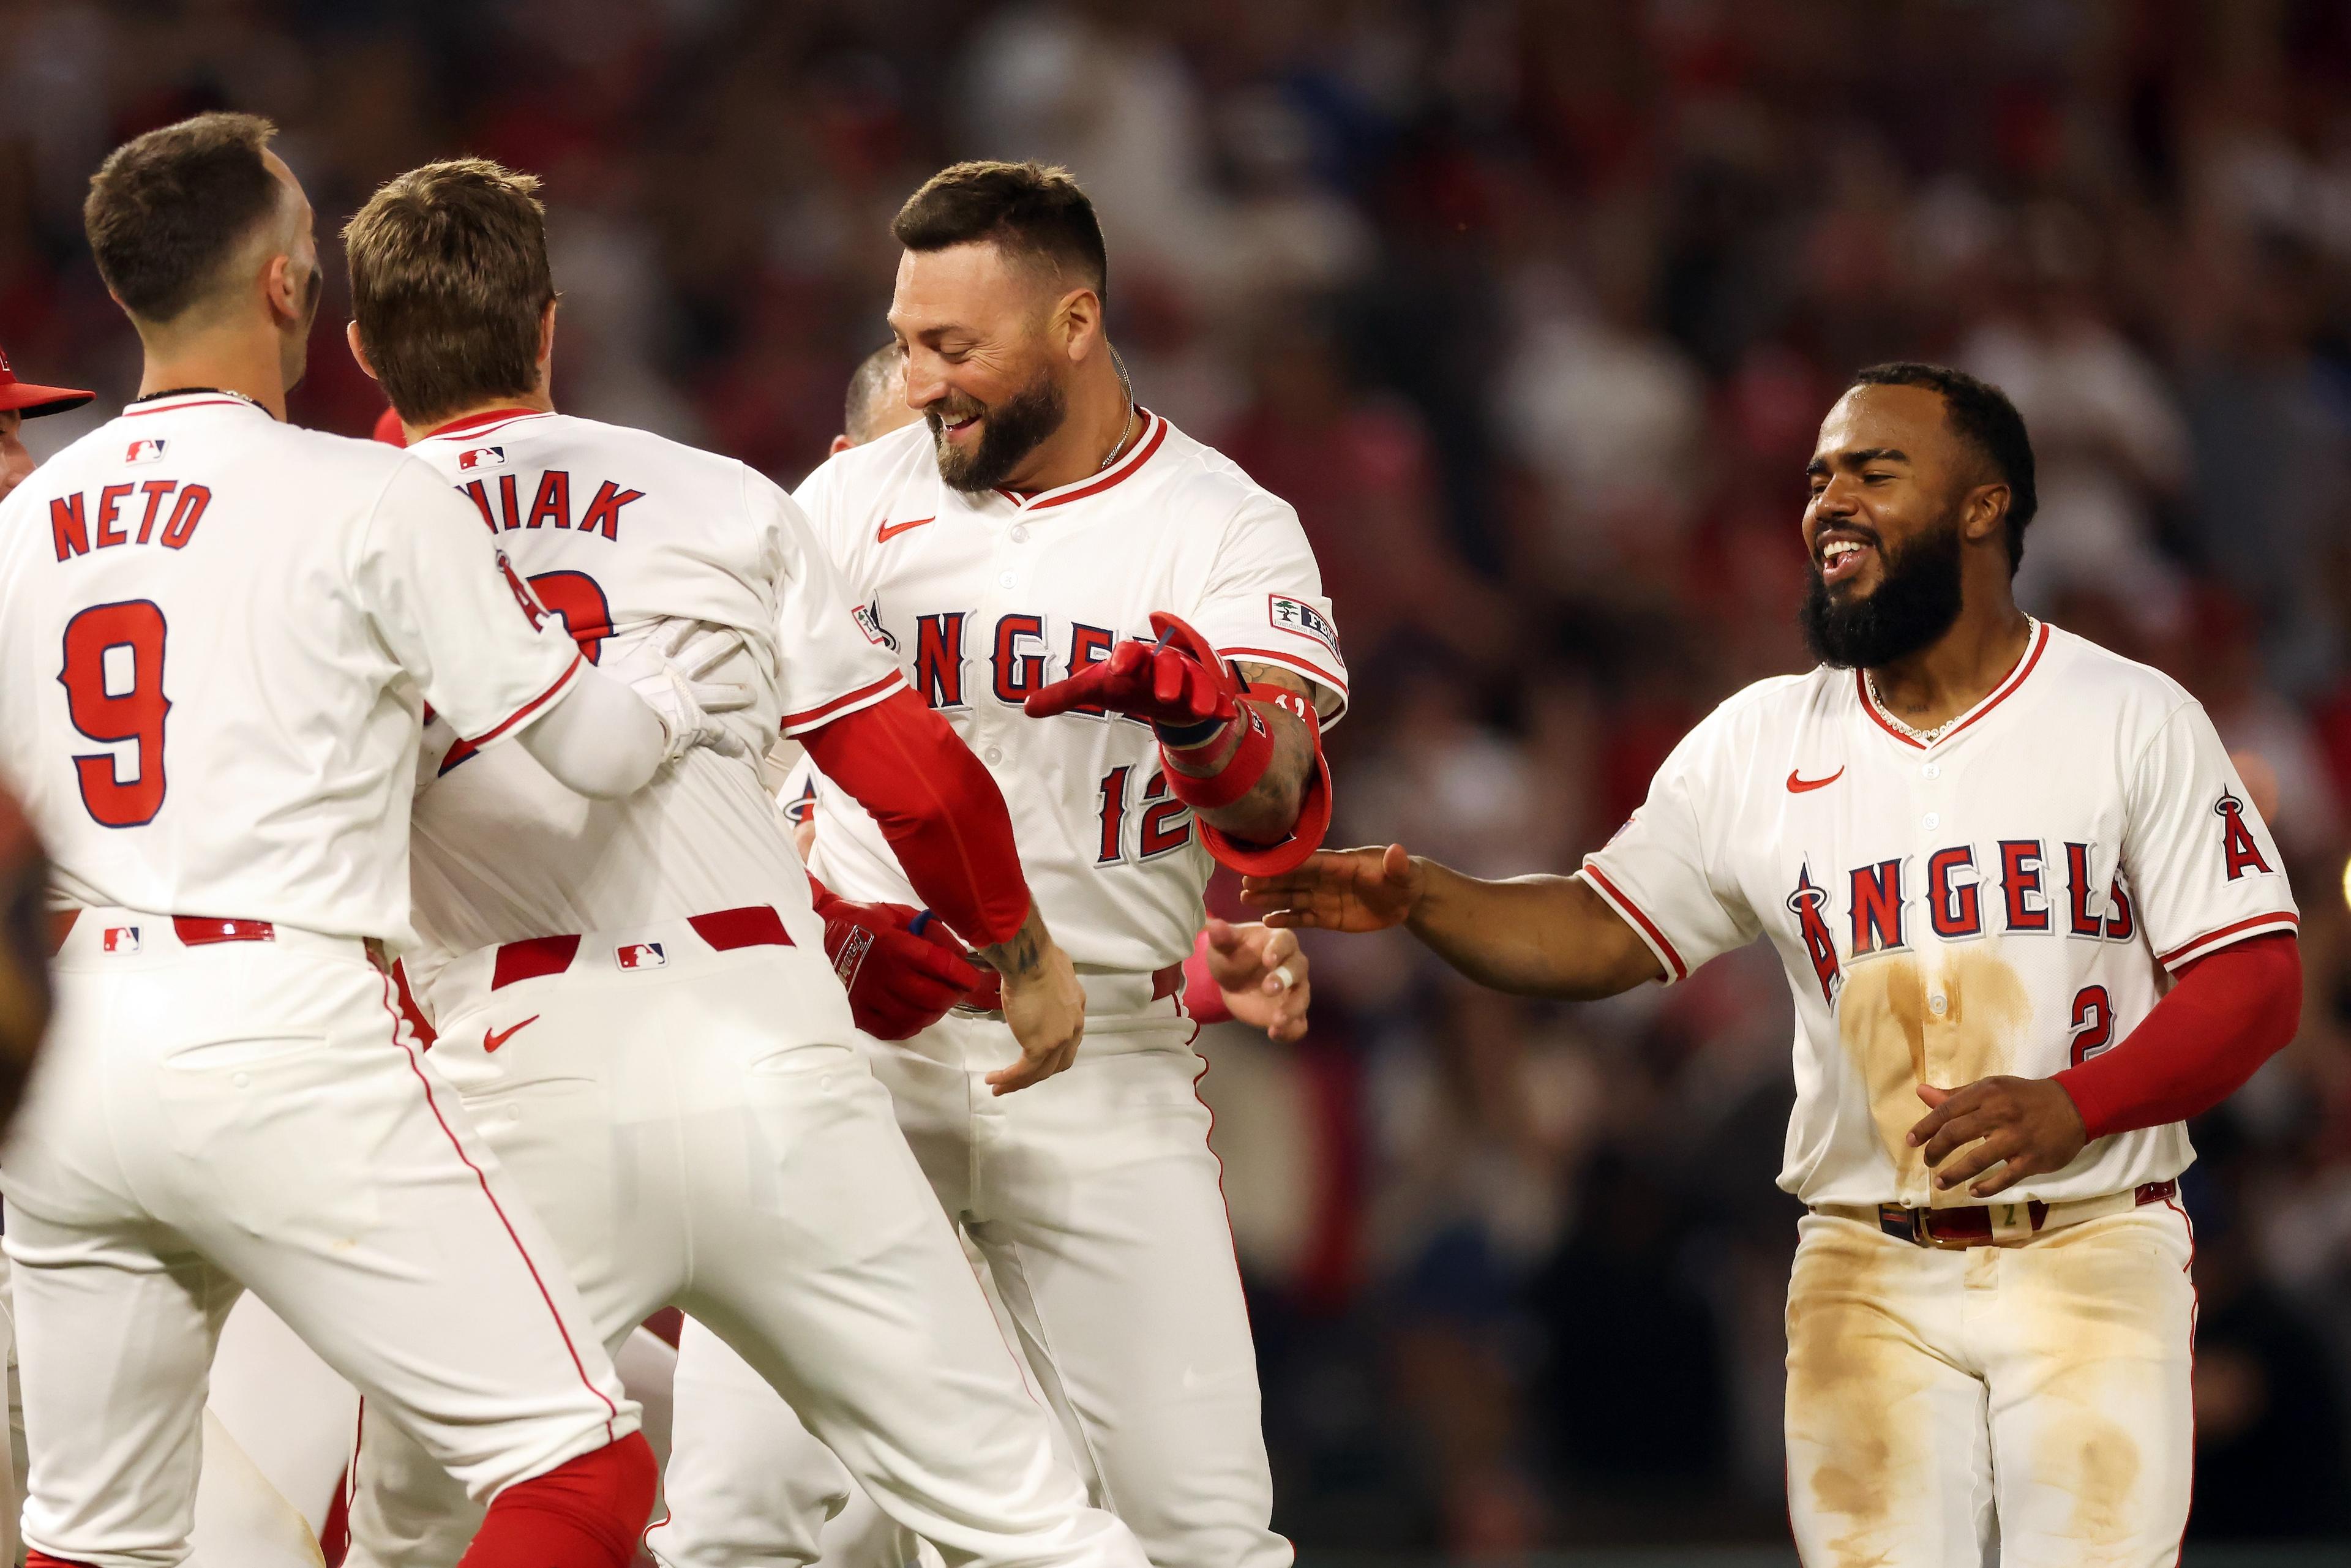 Kevin Pillar’s First Walk-Off Hit Since 2018 Gives Angels 6–5 Victory Over Tigers in 10 Innings